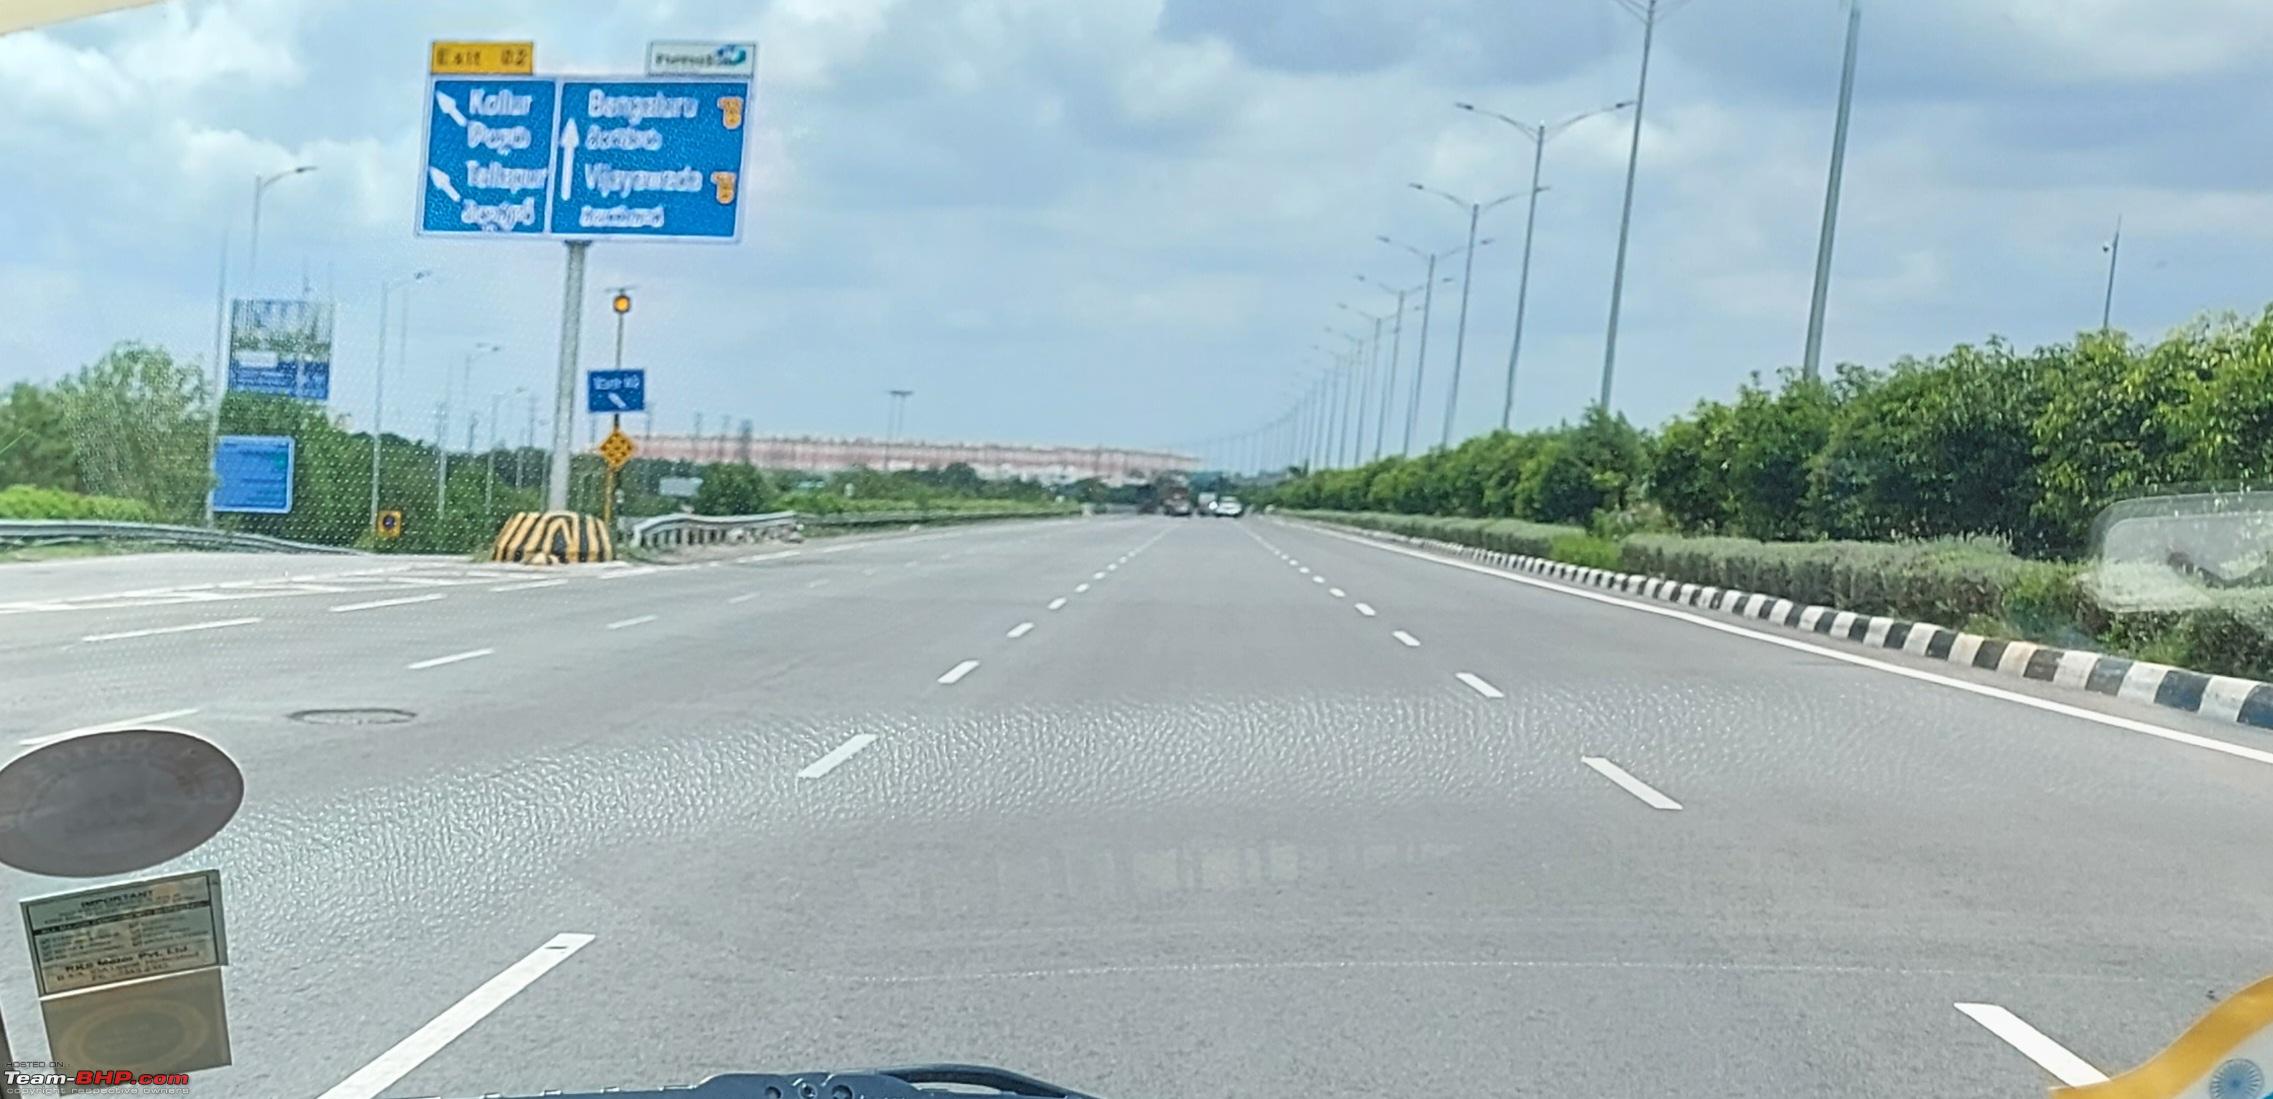 Know All the info about Hyderabad ORR Exit No. 1 - Gandipet